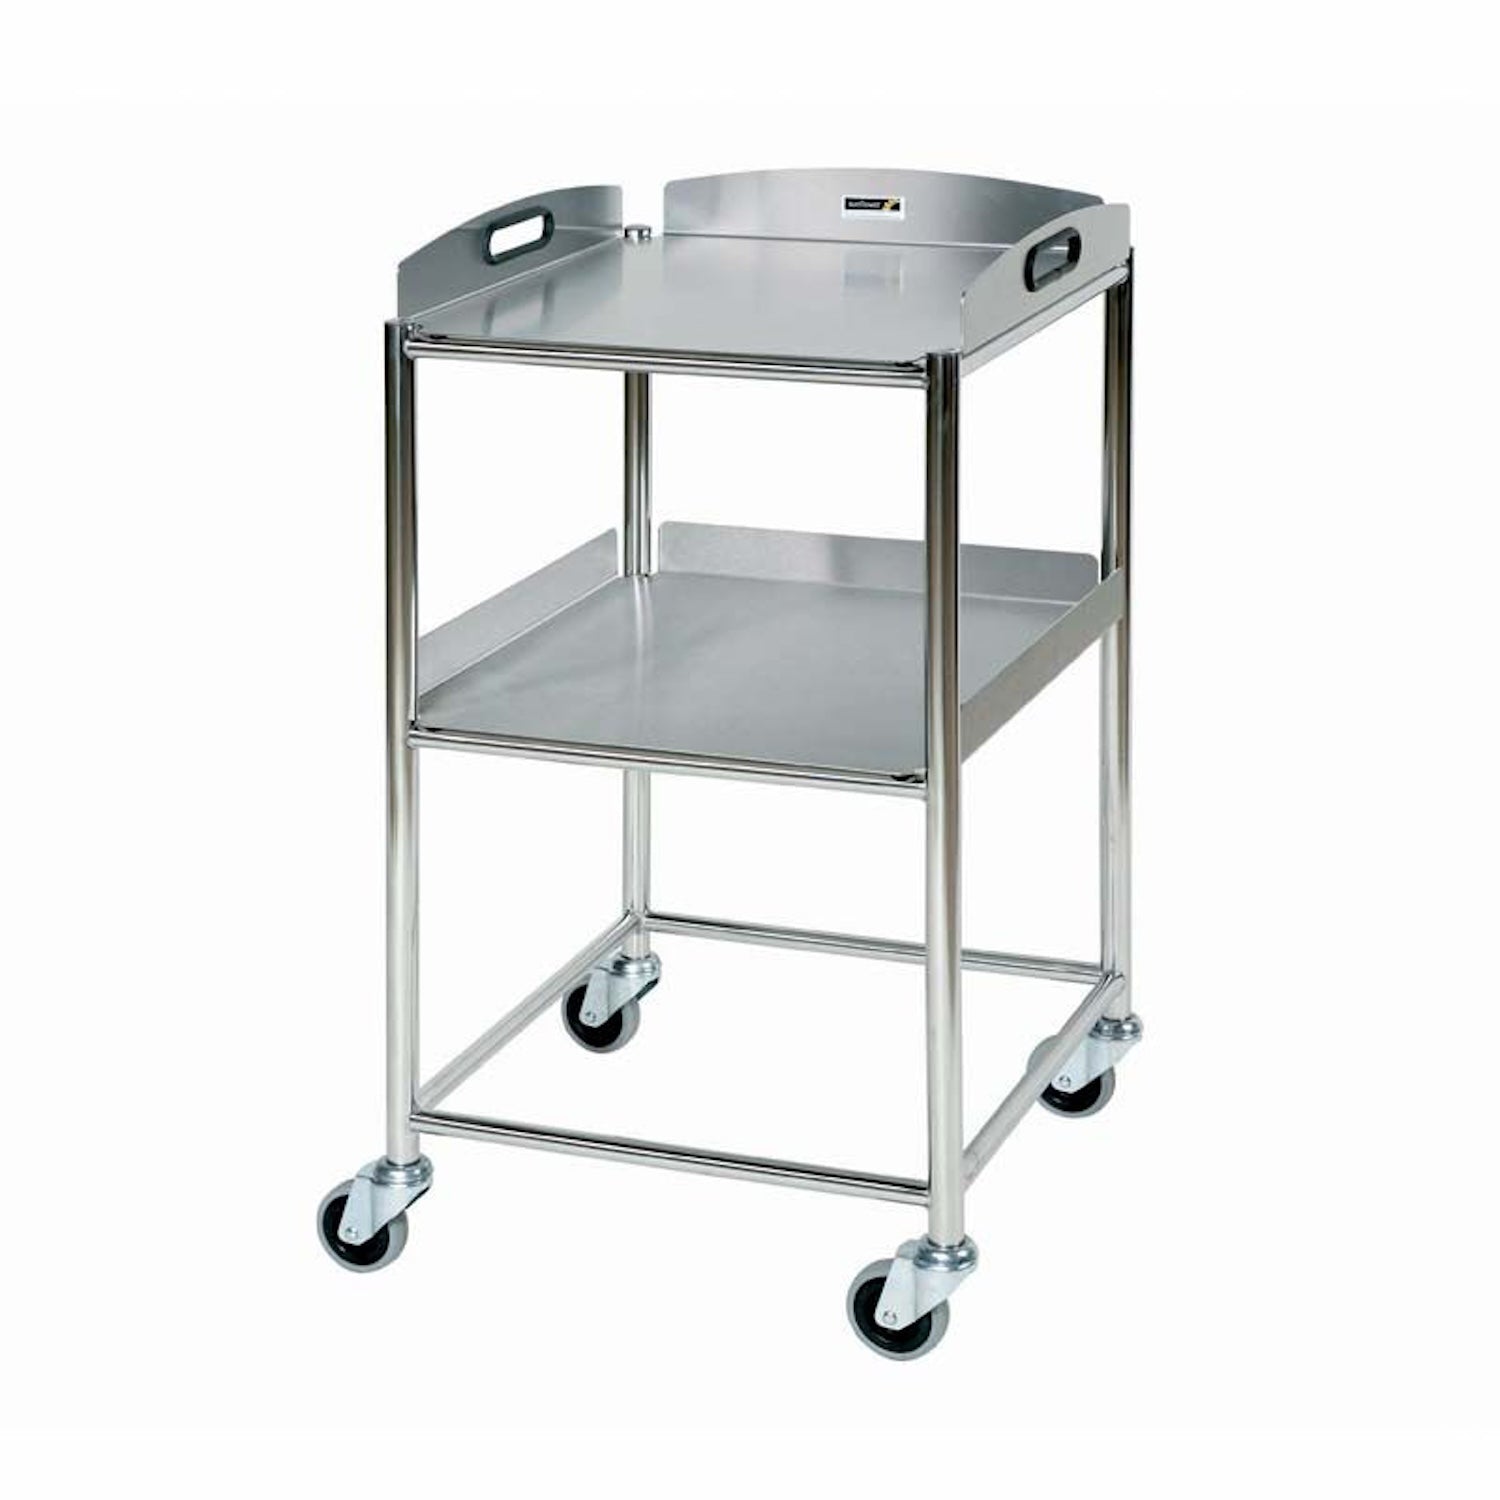 Sunflower ST4 Surgical Trolley | 2 Stainless Steel Trays